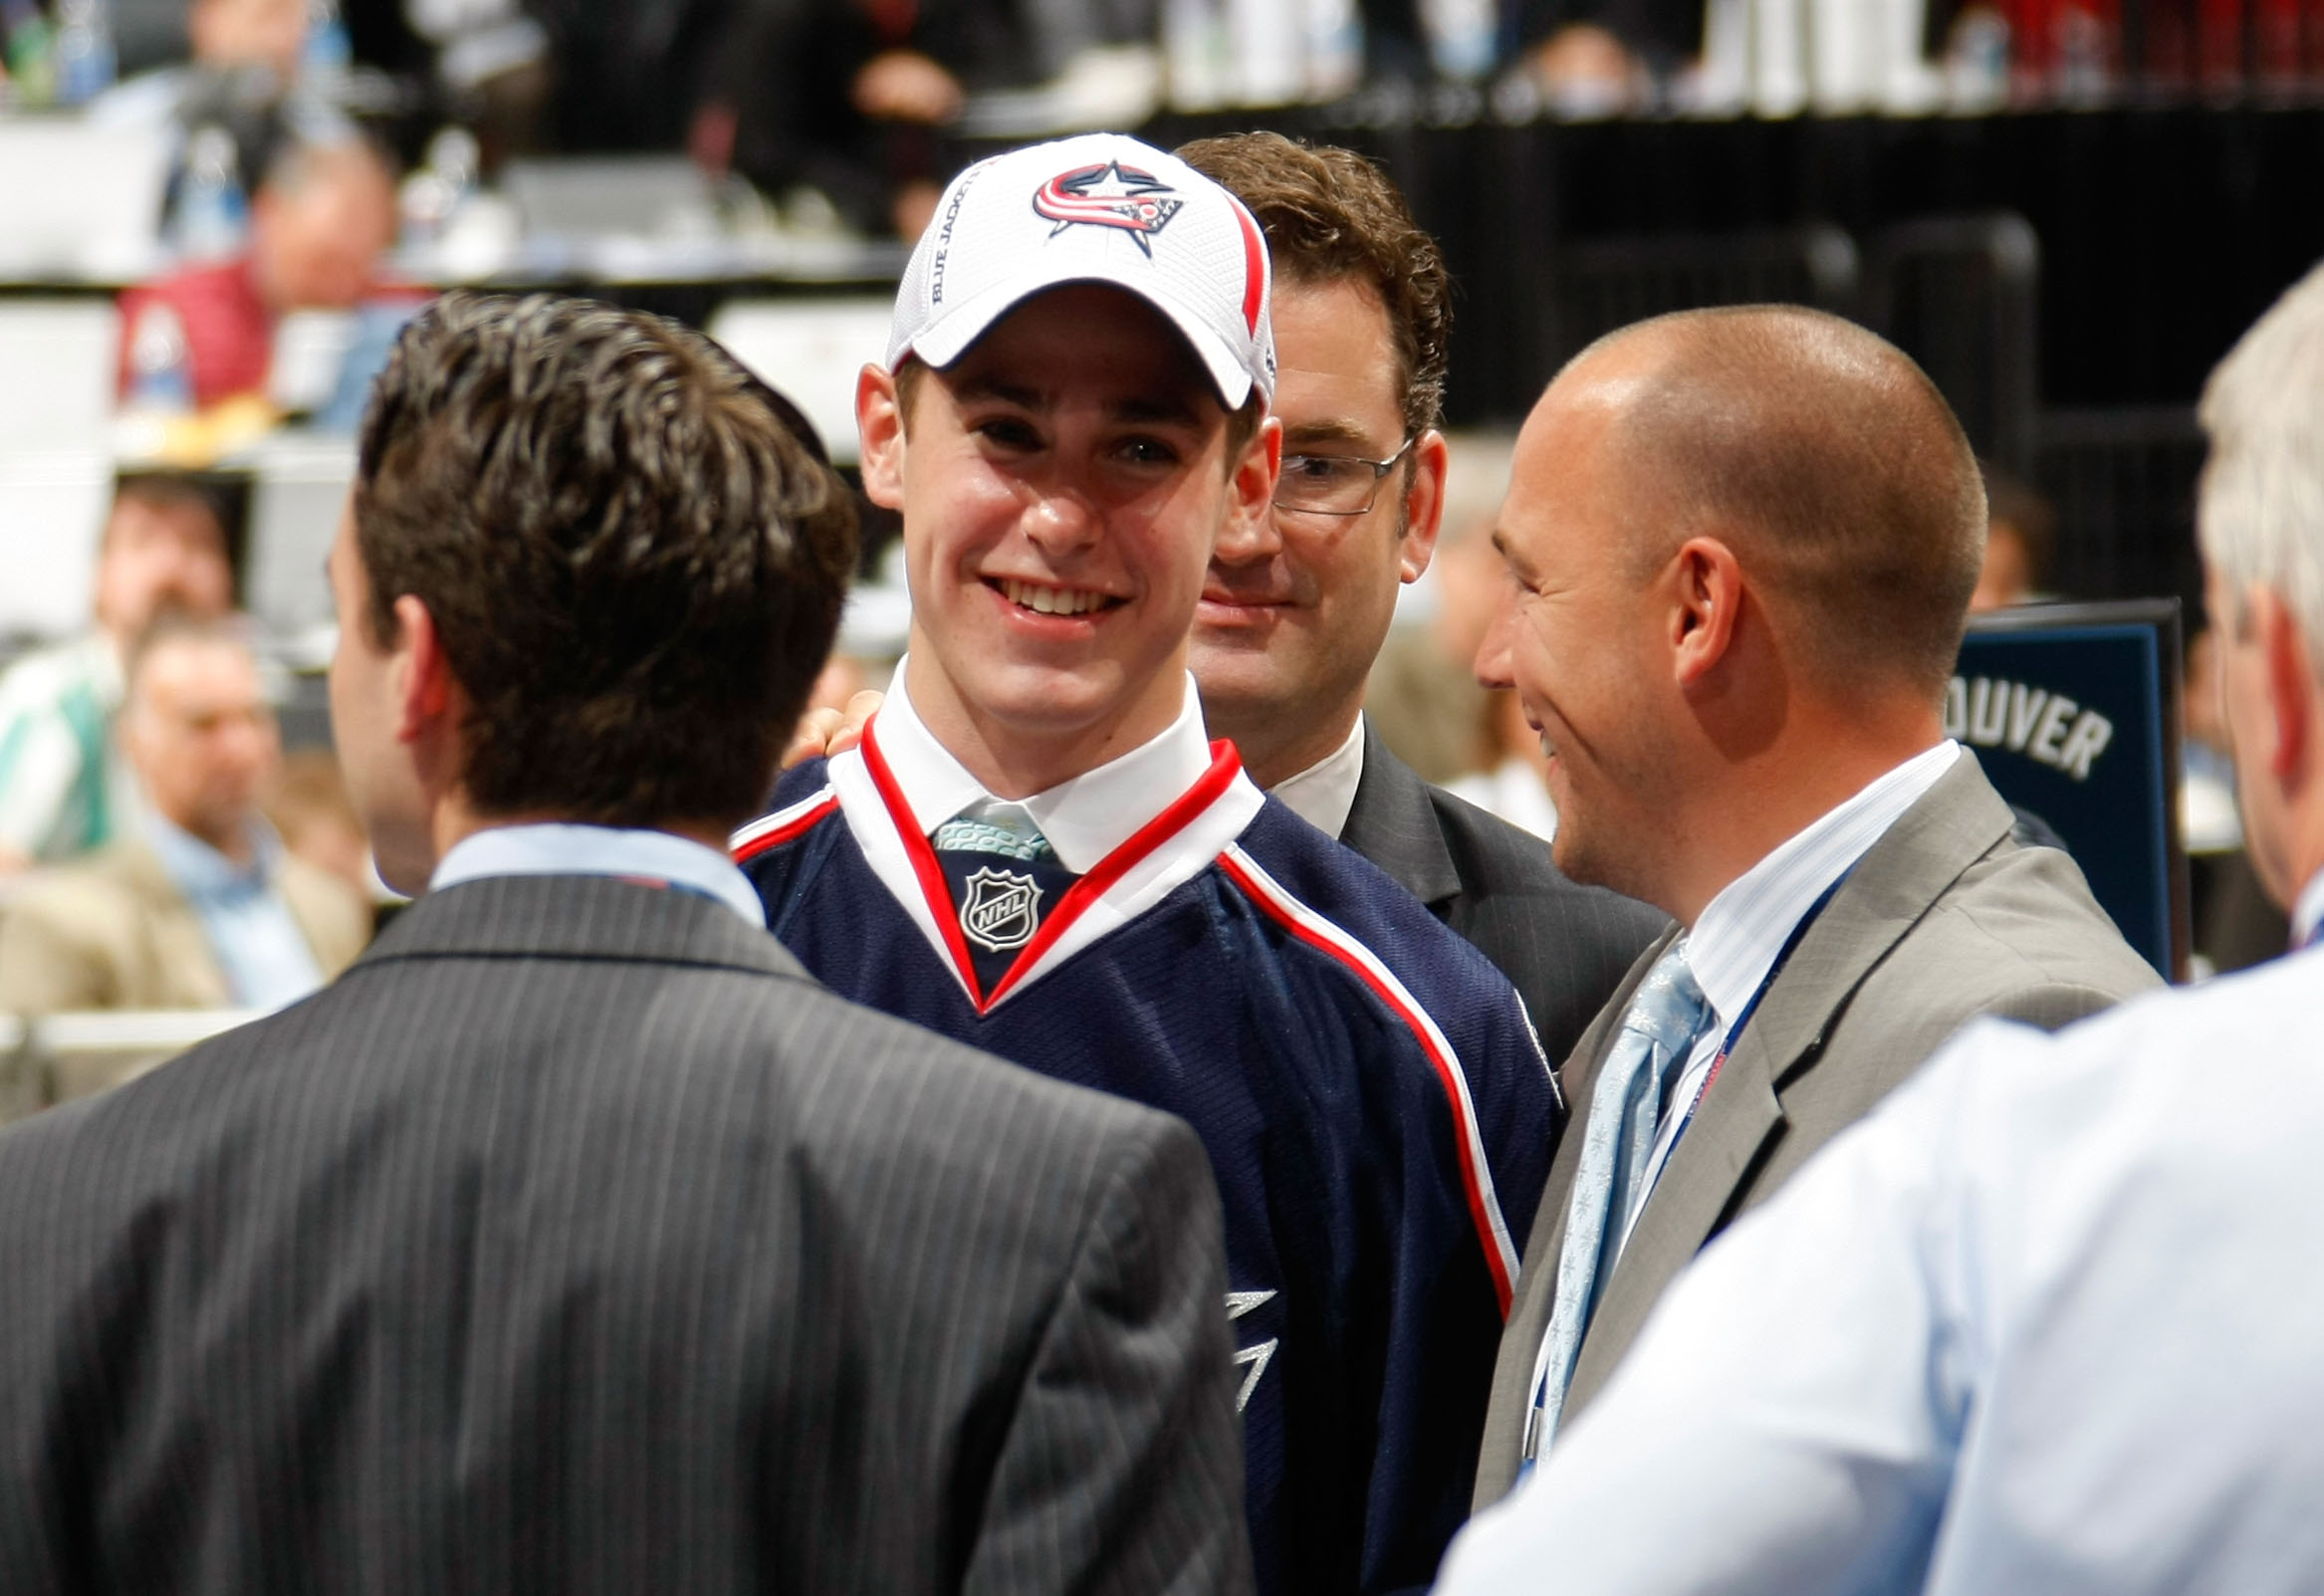 MONTREAL , QC - JUNE 26:  John Moore smiles while standing near the Columbus Blue Jackets draft table after being drafted by the Blue Jackets during the first round of the 2009 NHL Entry Draft at the Bell Centre on June 26, 2009 in Montreal, Quebec, Canada.  (Photo by Dave Sandford/NHLI via Getty Images)